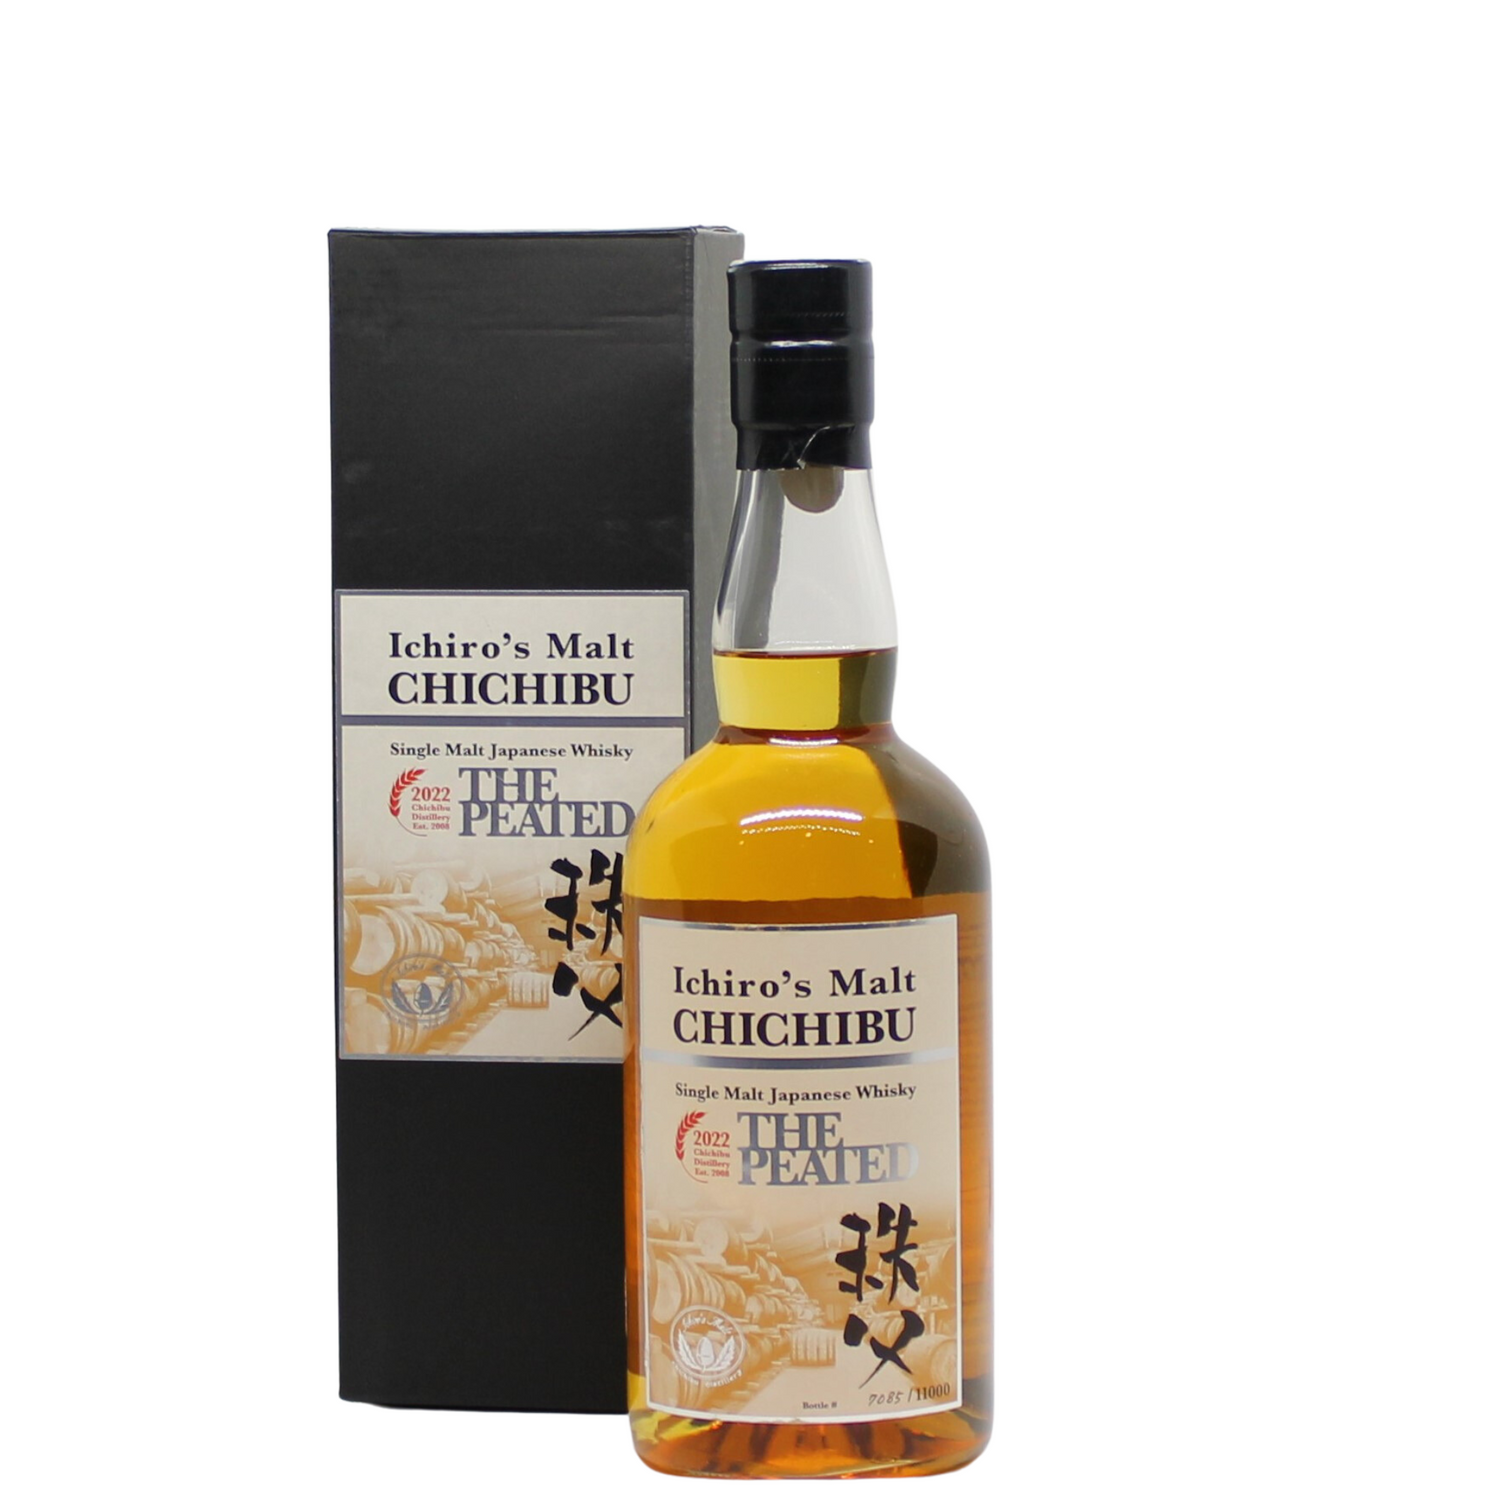 The Peated 2022 Edition from the Chichibu Distillery was released after a gap of four years. The previous release was bottled in 2018 for the 10th anniversary of Chichibu. Matured in ex-Bourbon barrels for between five and seven years, only 11,000 bottles were produced.